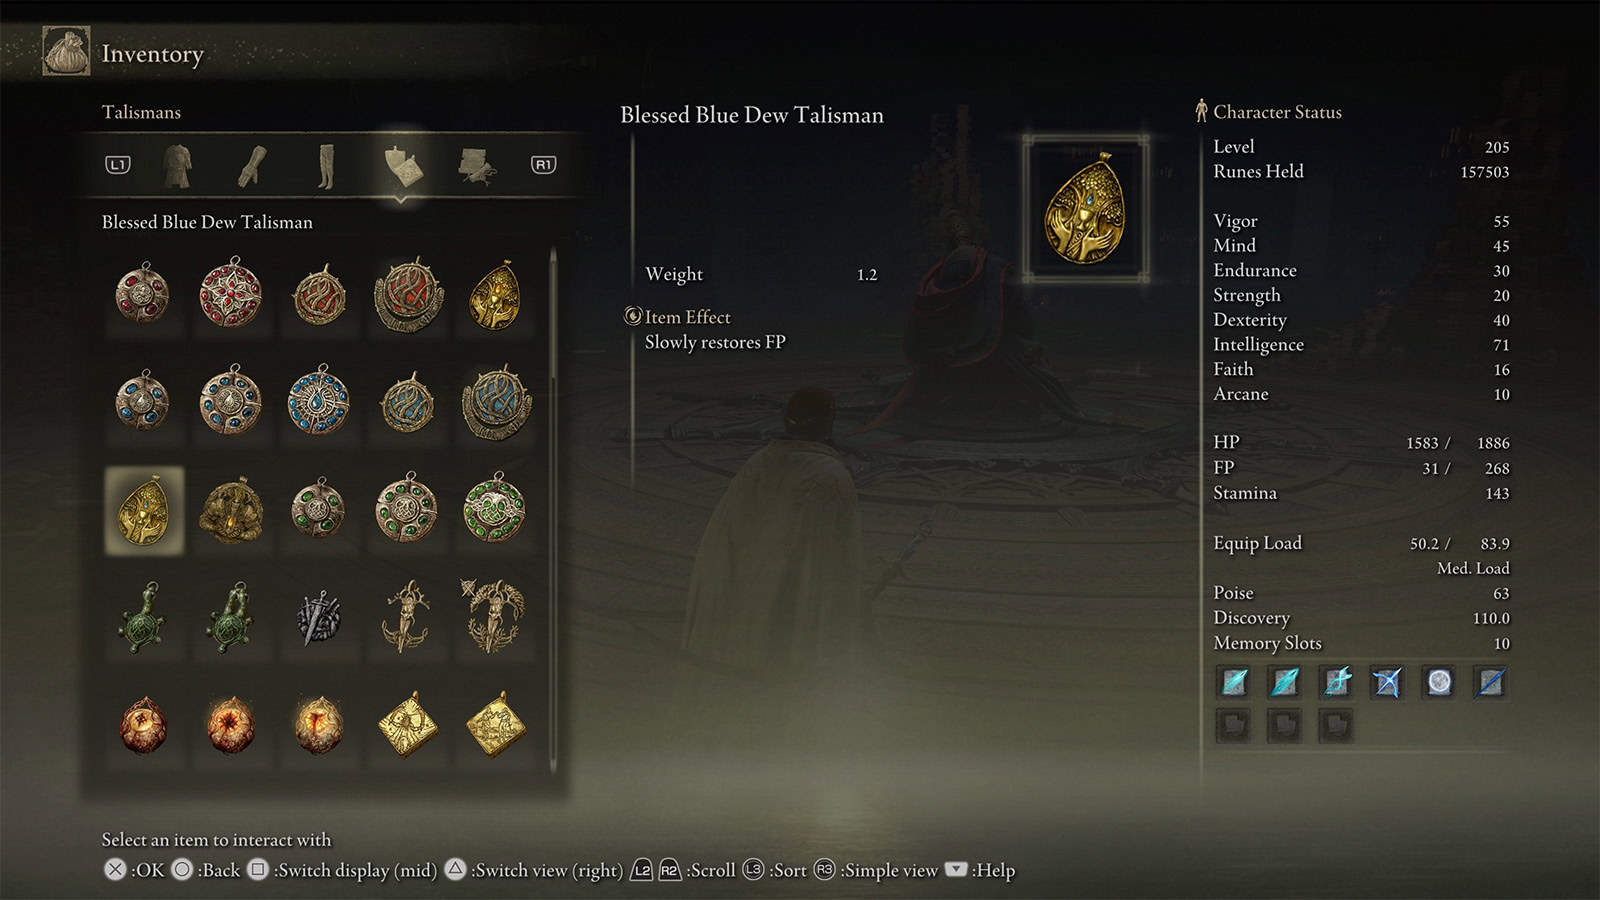 A screenshot of the Blessed Blue Dew Talisman in Elden Ring